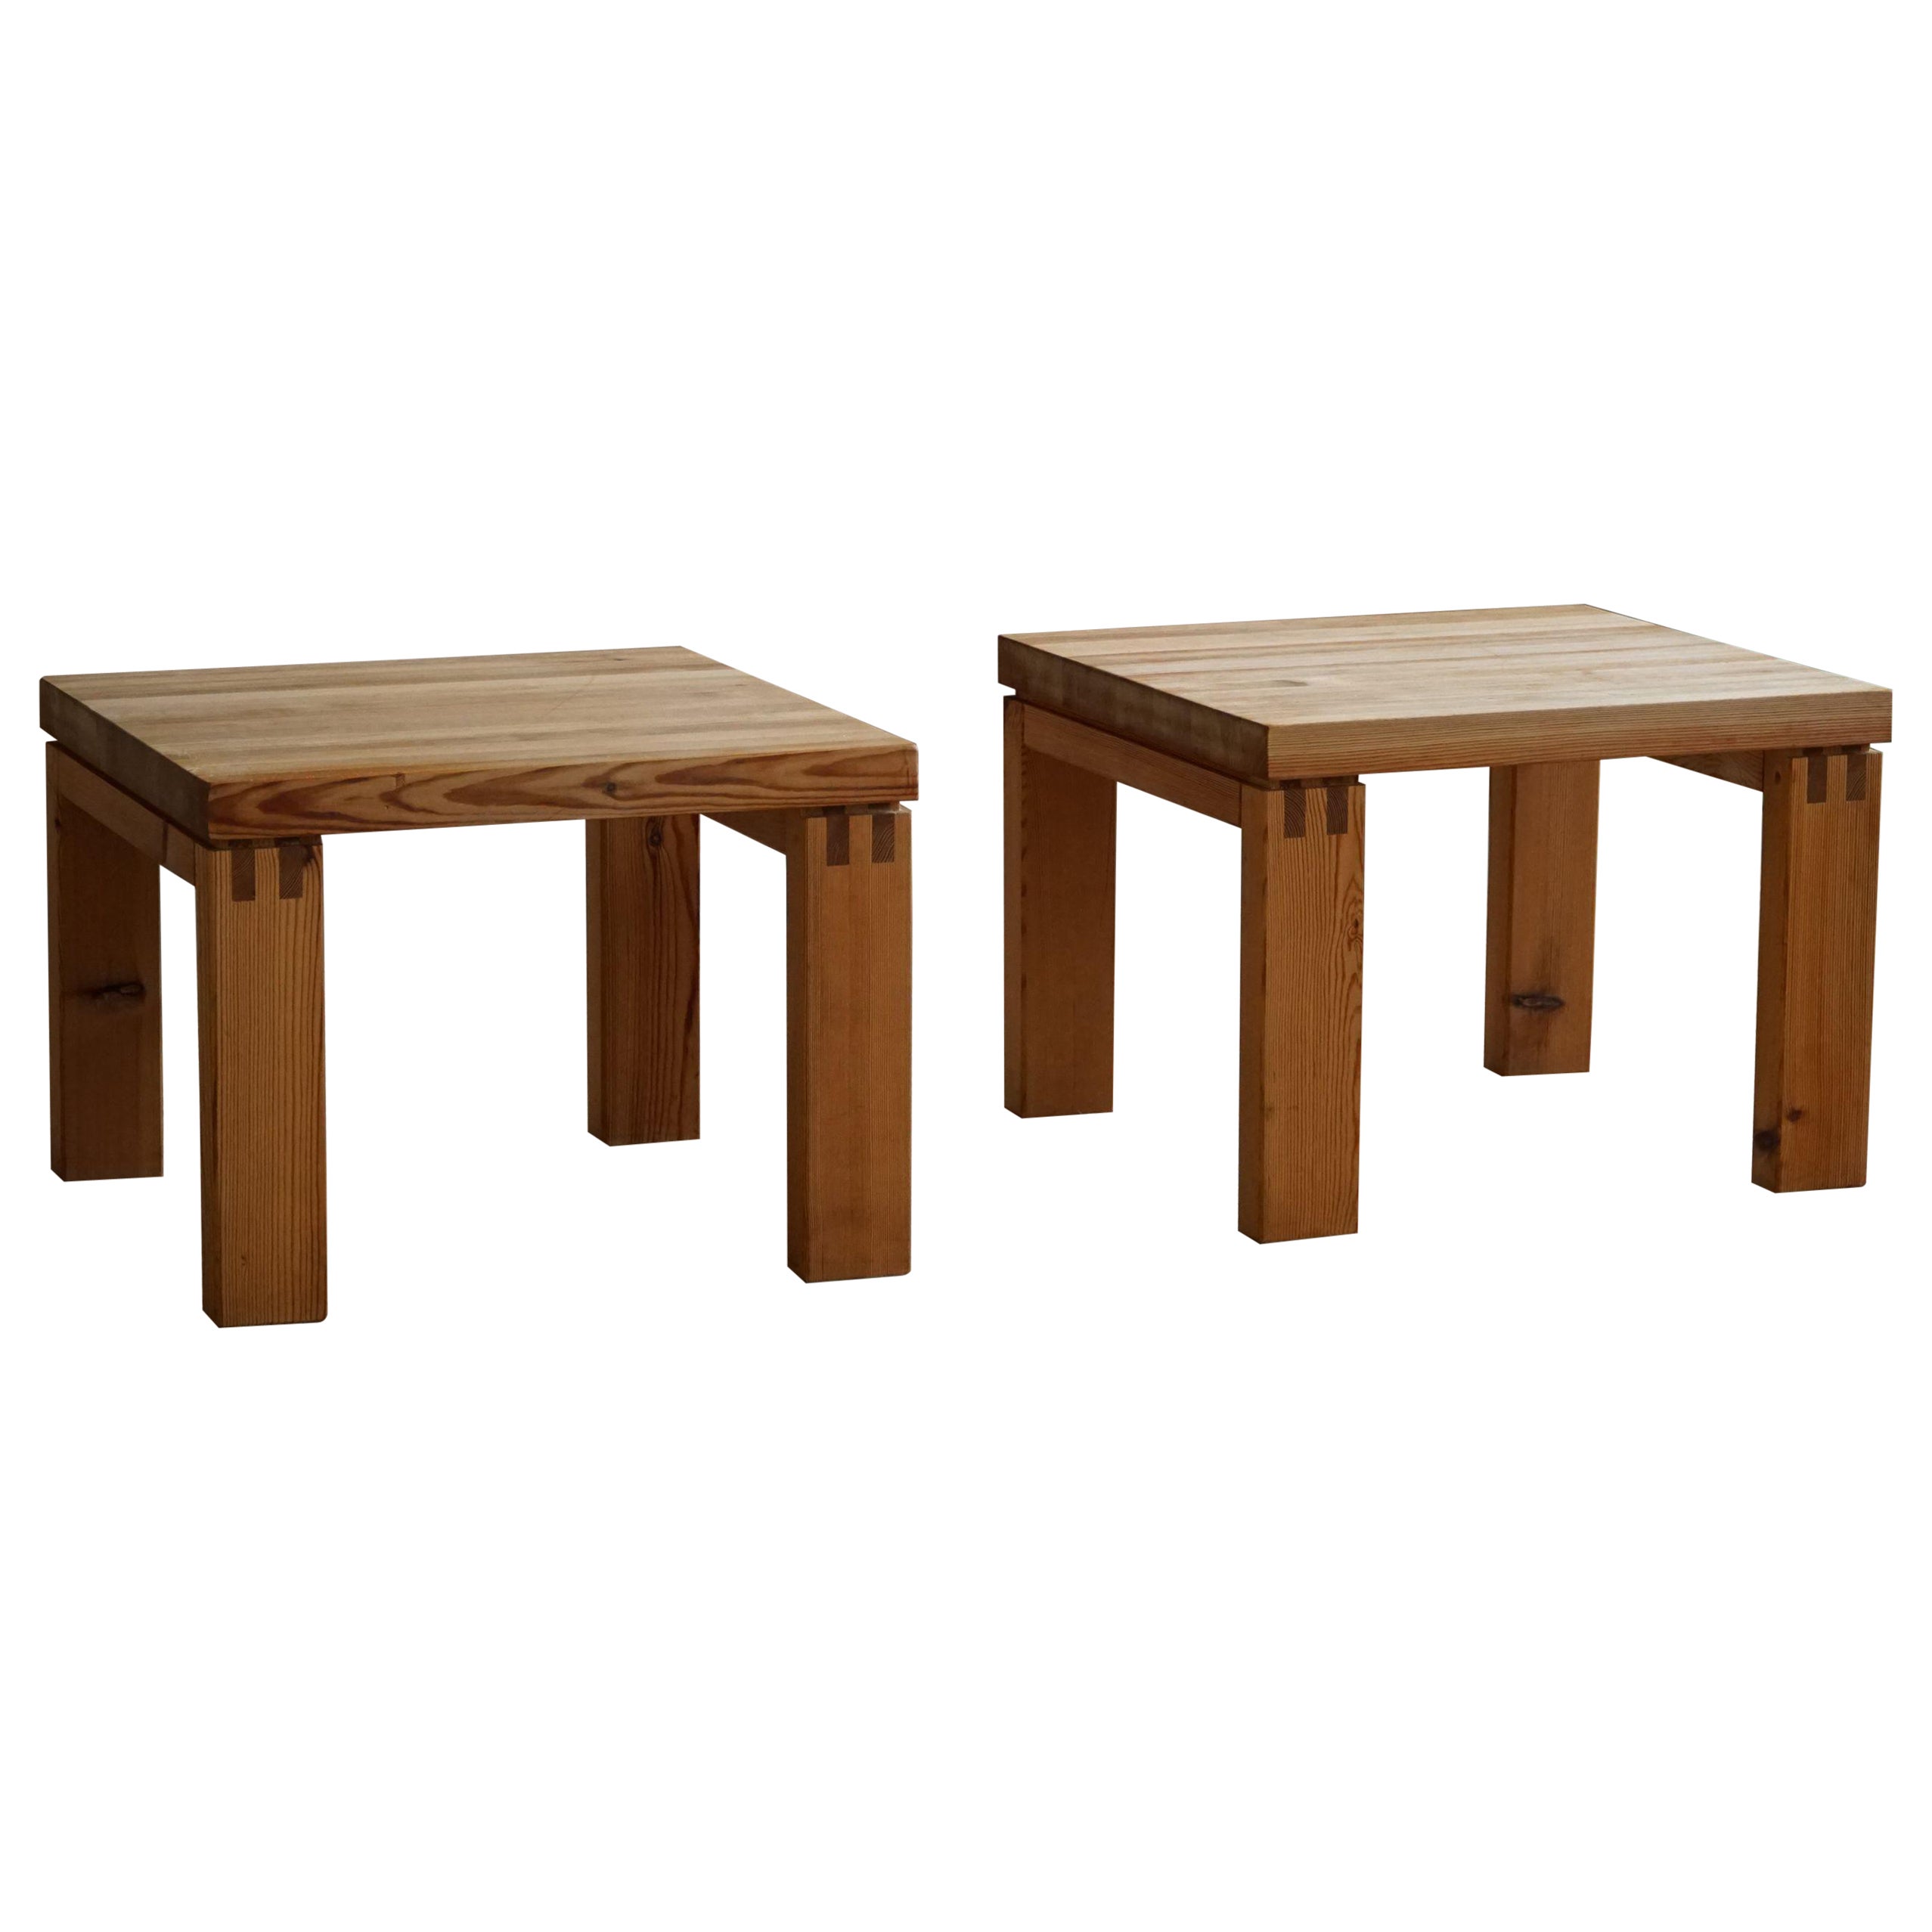 Pair of Danish Modern Brutalist Side Tables in Solid Pine, Made by Nytibo, 1970s